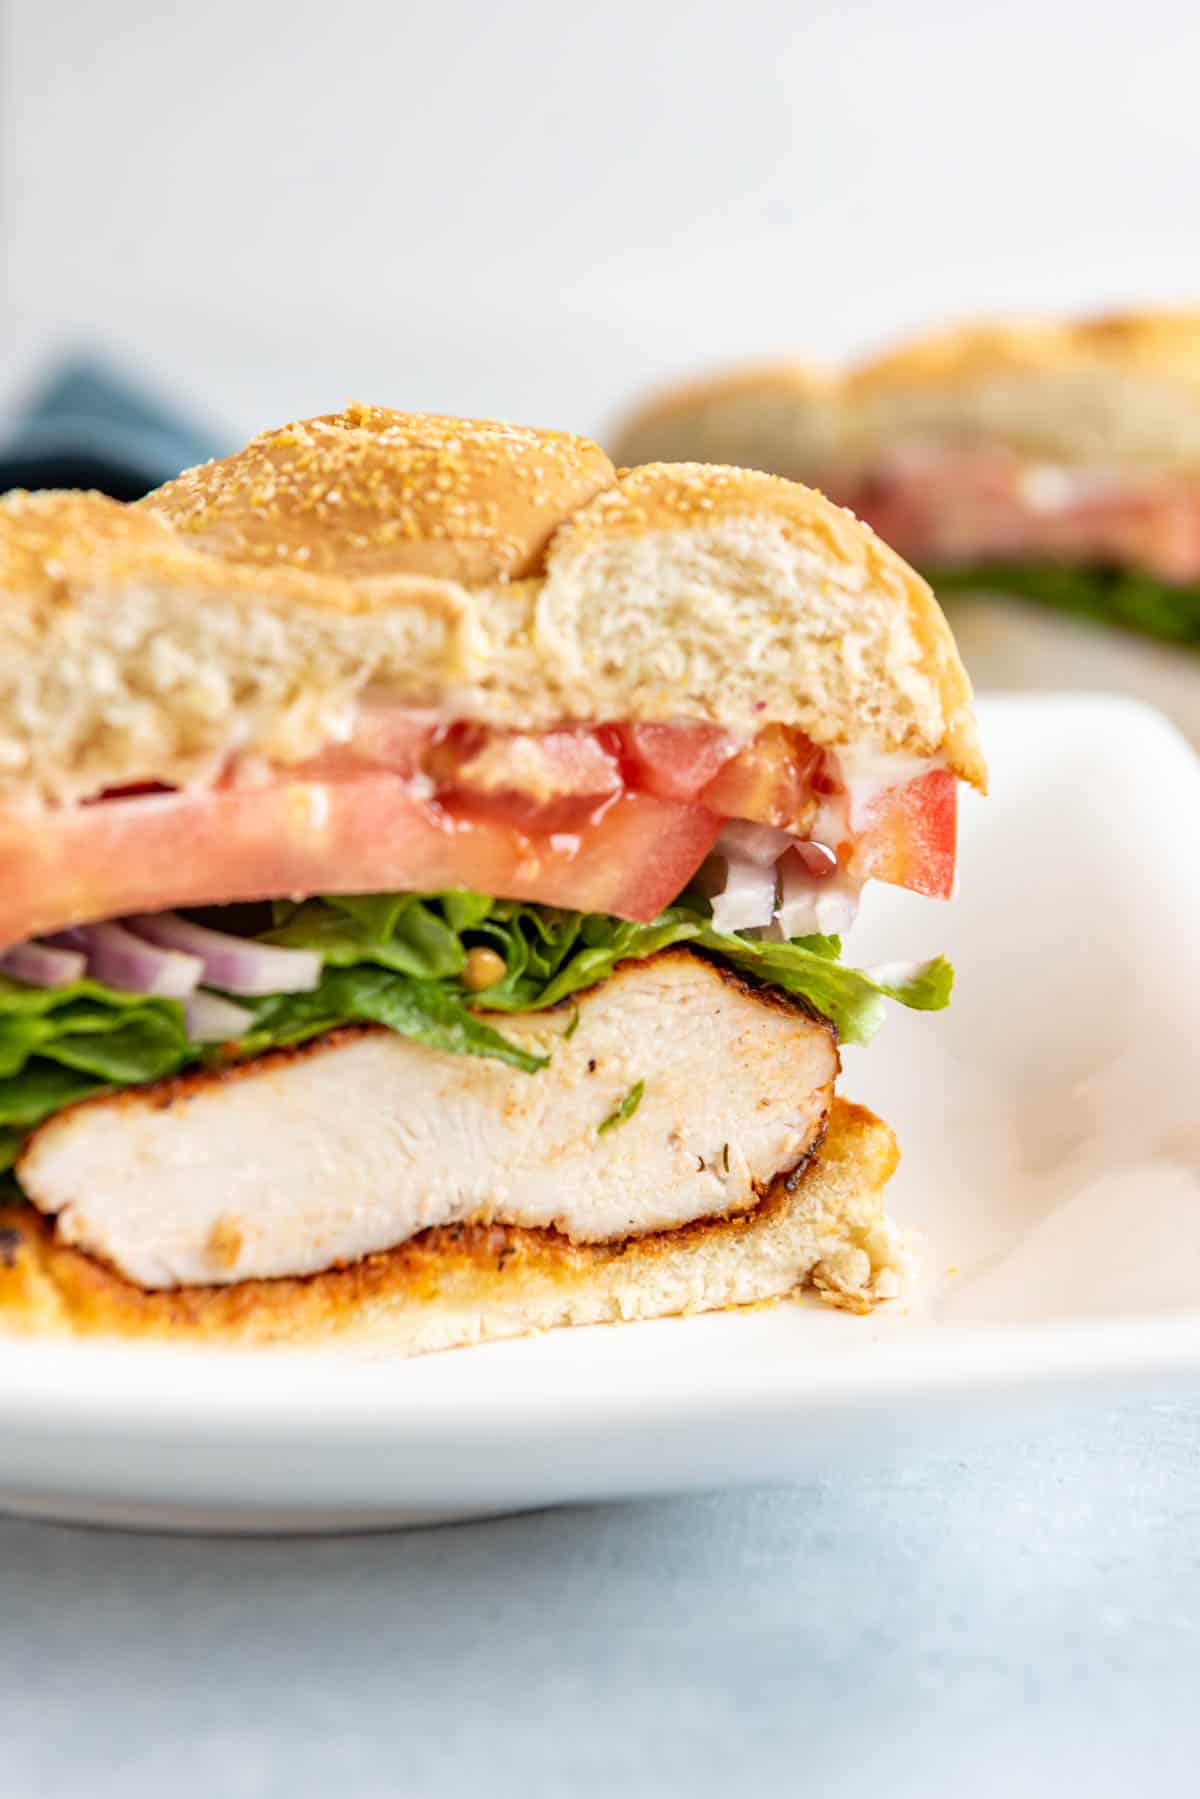 A sliced grilled Cajun chicken sandwich showing off the contents inside.